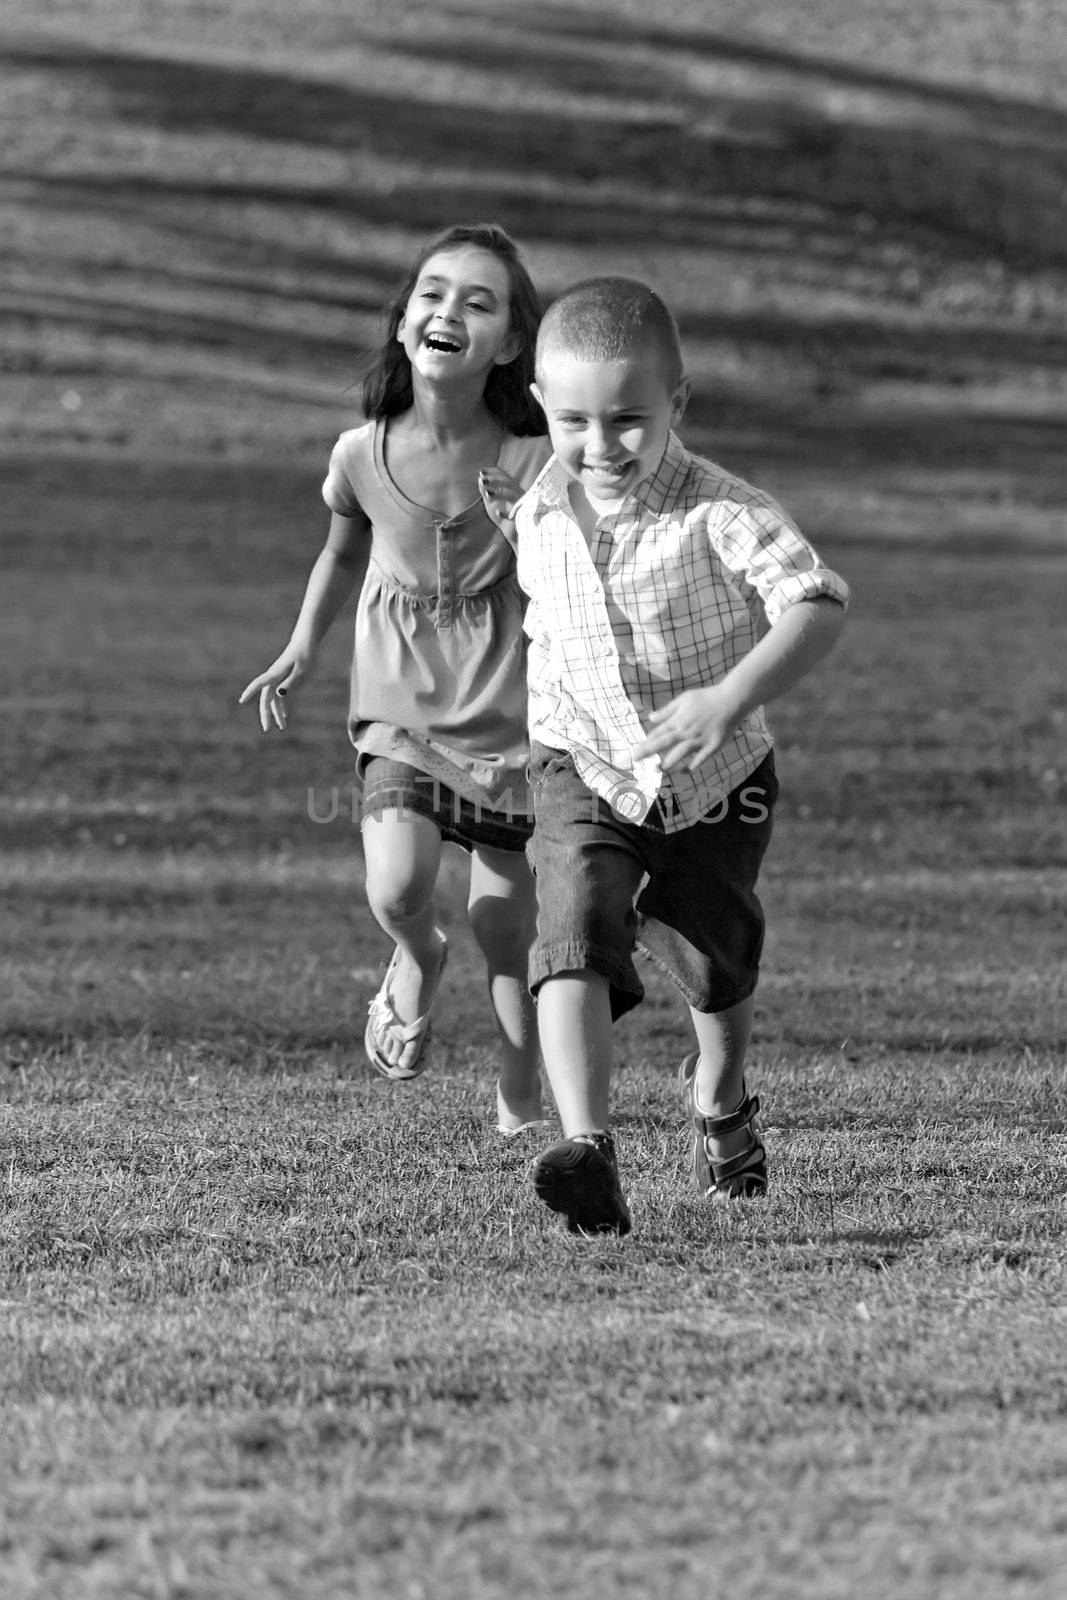 Little Kids Running by graficallyminded